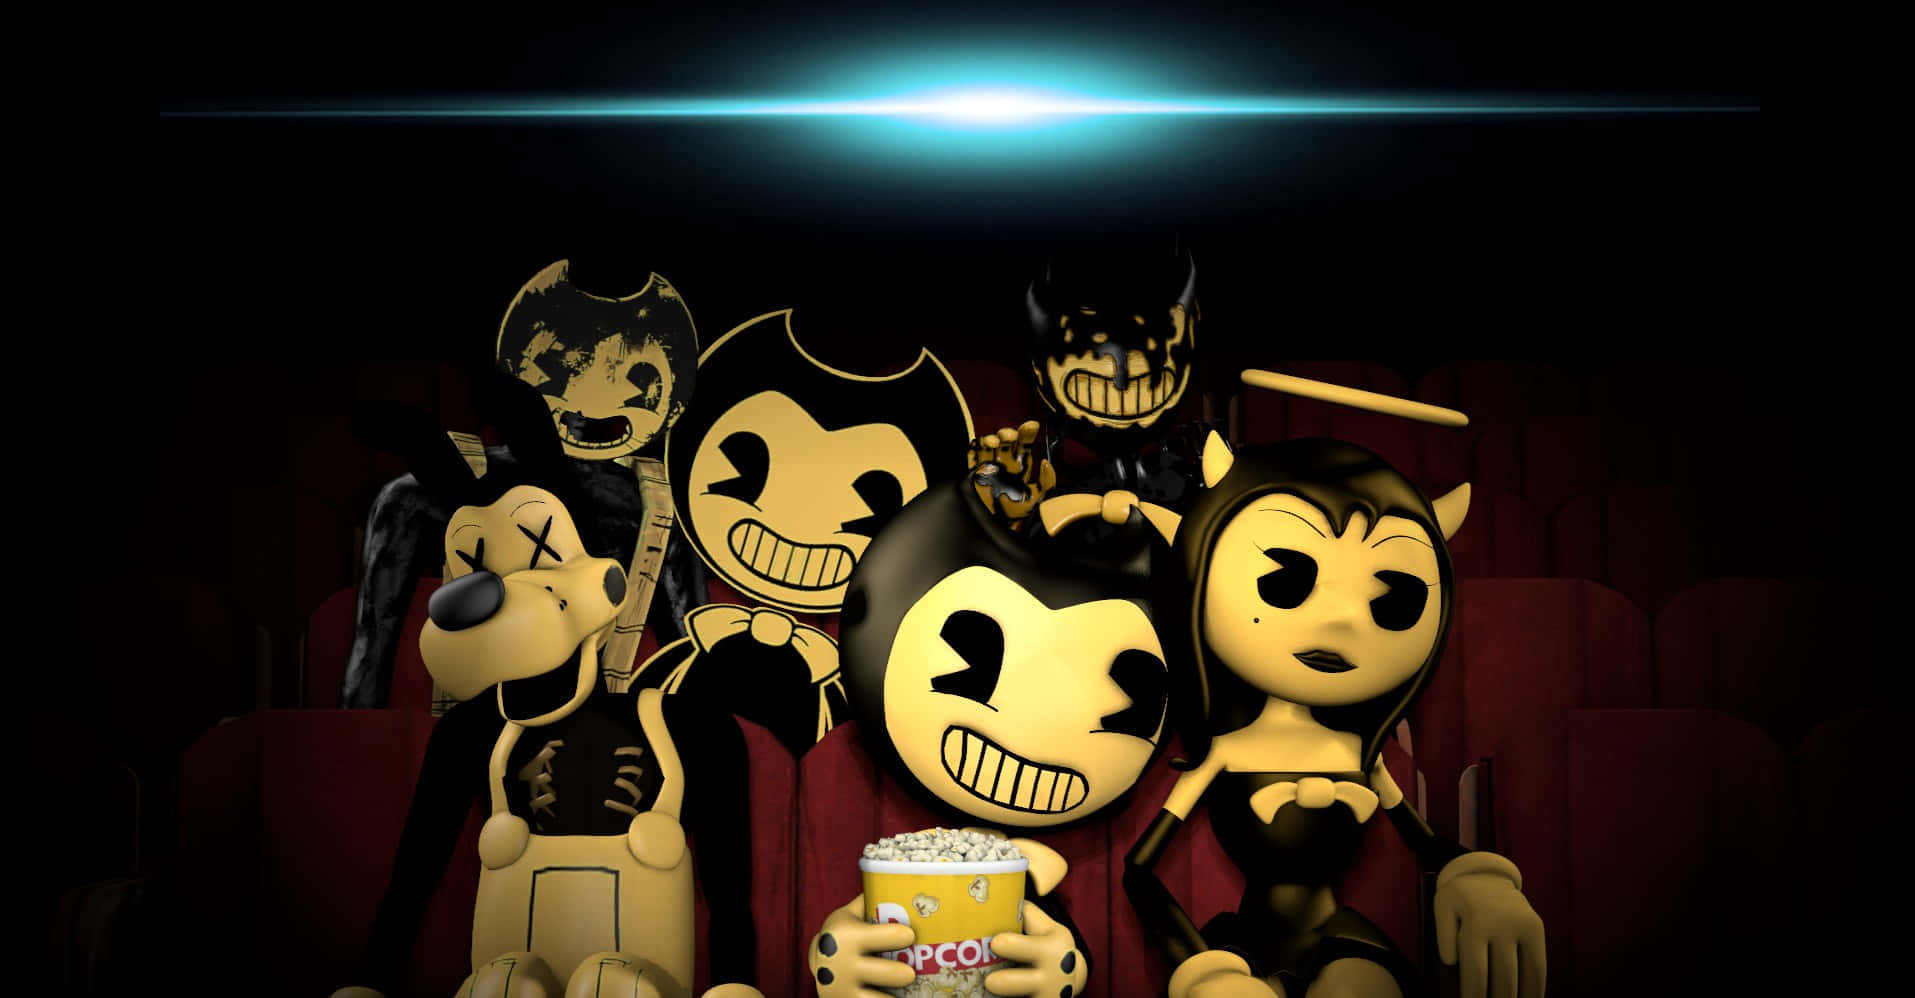 Join Bendy and the Ink Machine on a dark adventure you won't forget!